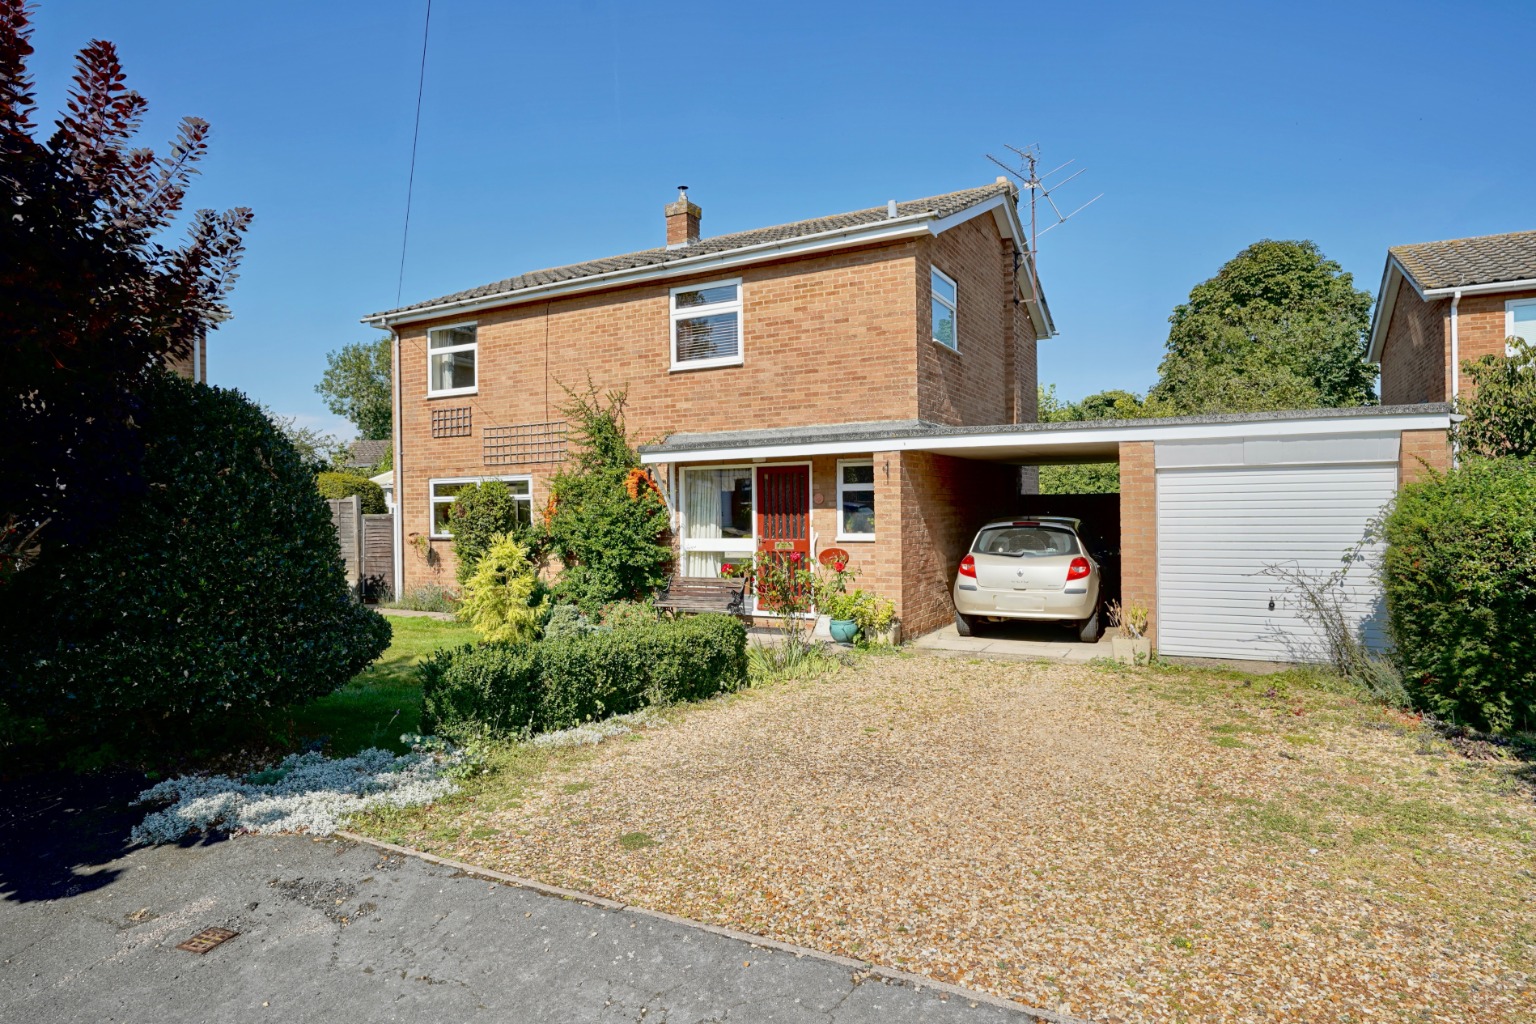 4 bed detached house for sale in St Johns Place, Huntingdon - Property Image 1